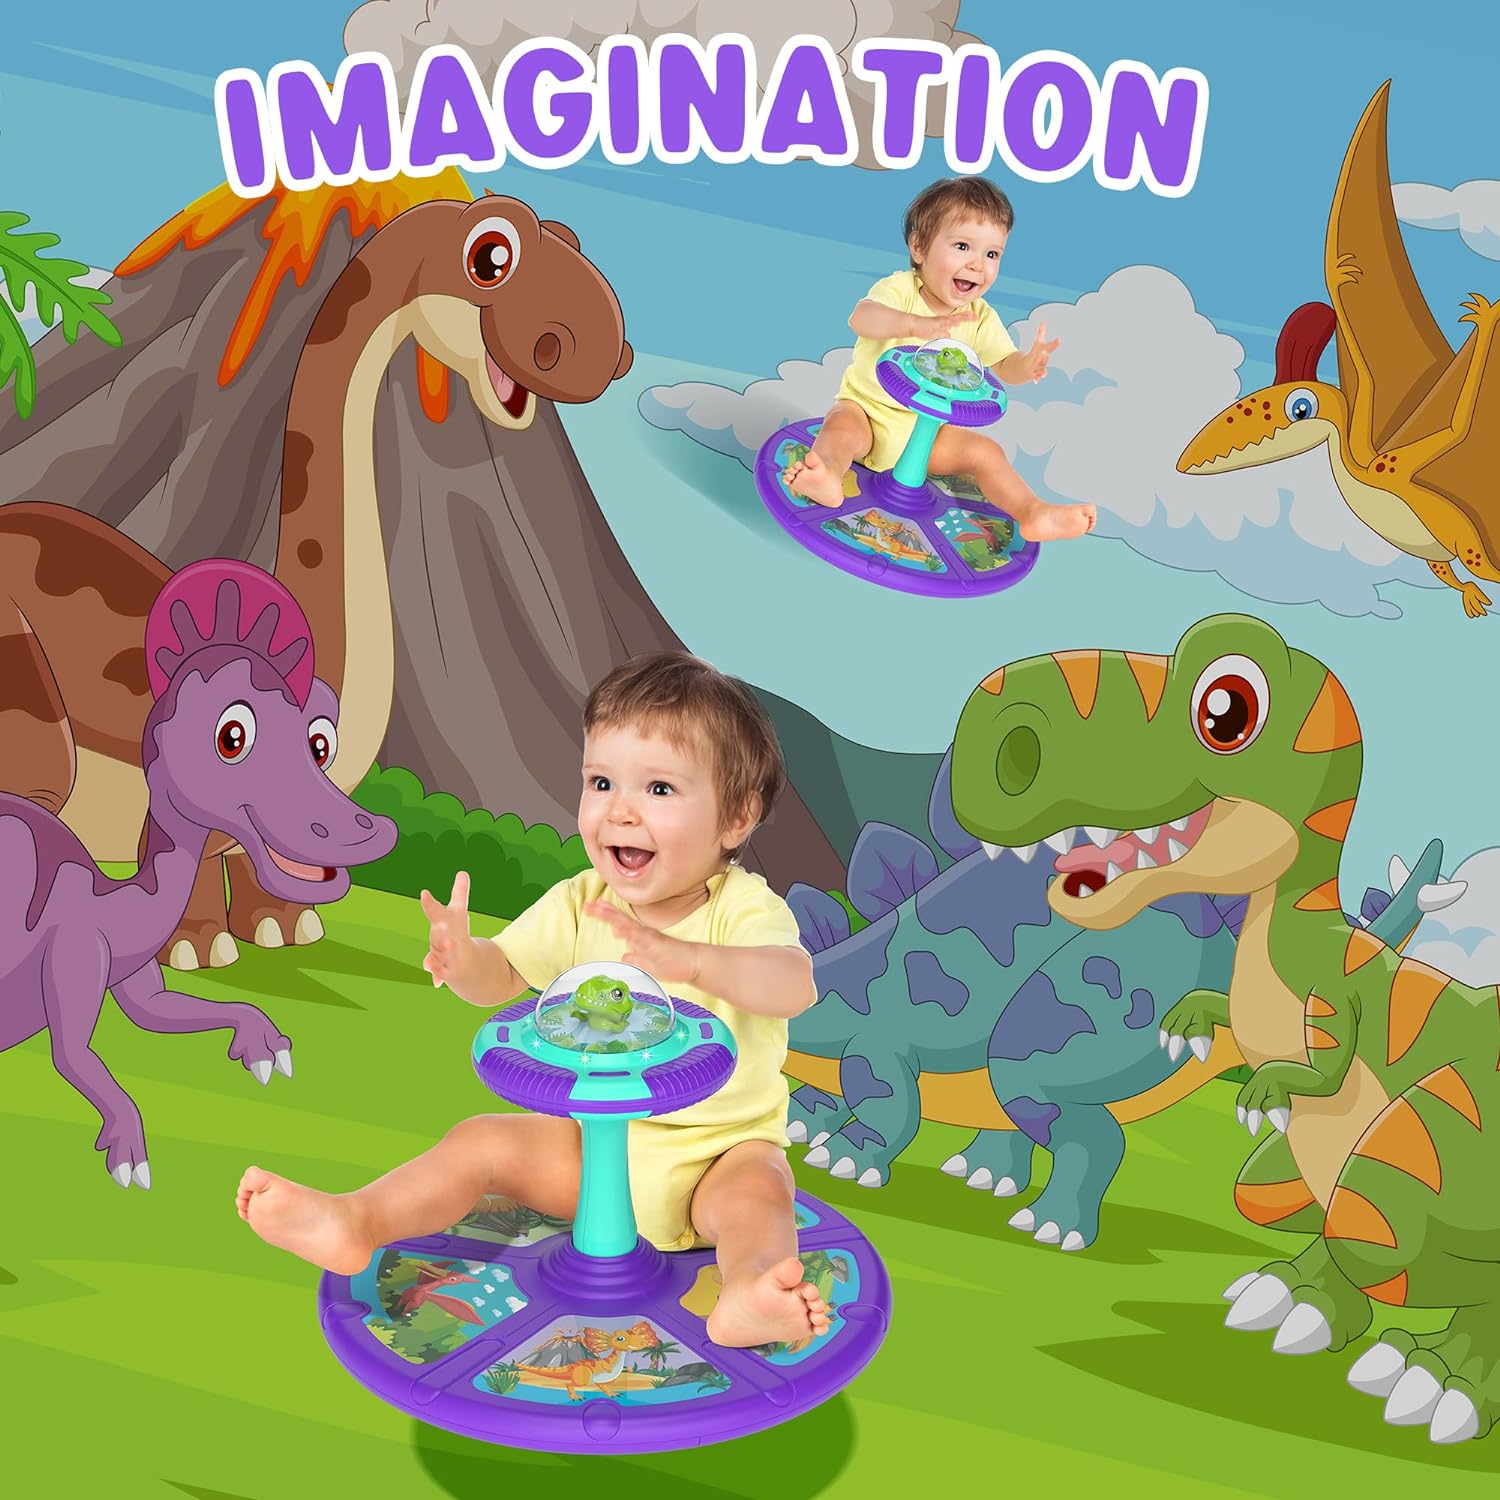 Dinosaur Sit and Spin Toddler Toys, 360° Spin Activity Toys with Music & LED Lights for Ages 1-3 Years Kids, Indoor Outdoor Early Development Toys & Birthday Gift for Boys Girls 18 Months +